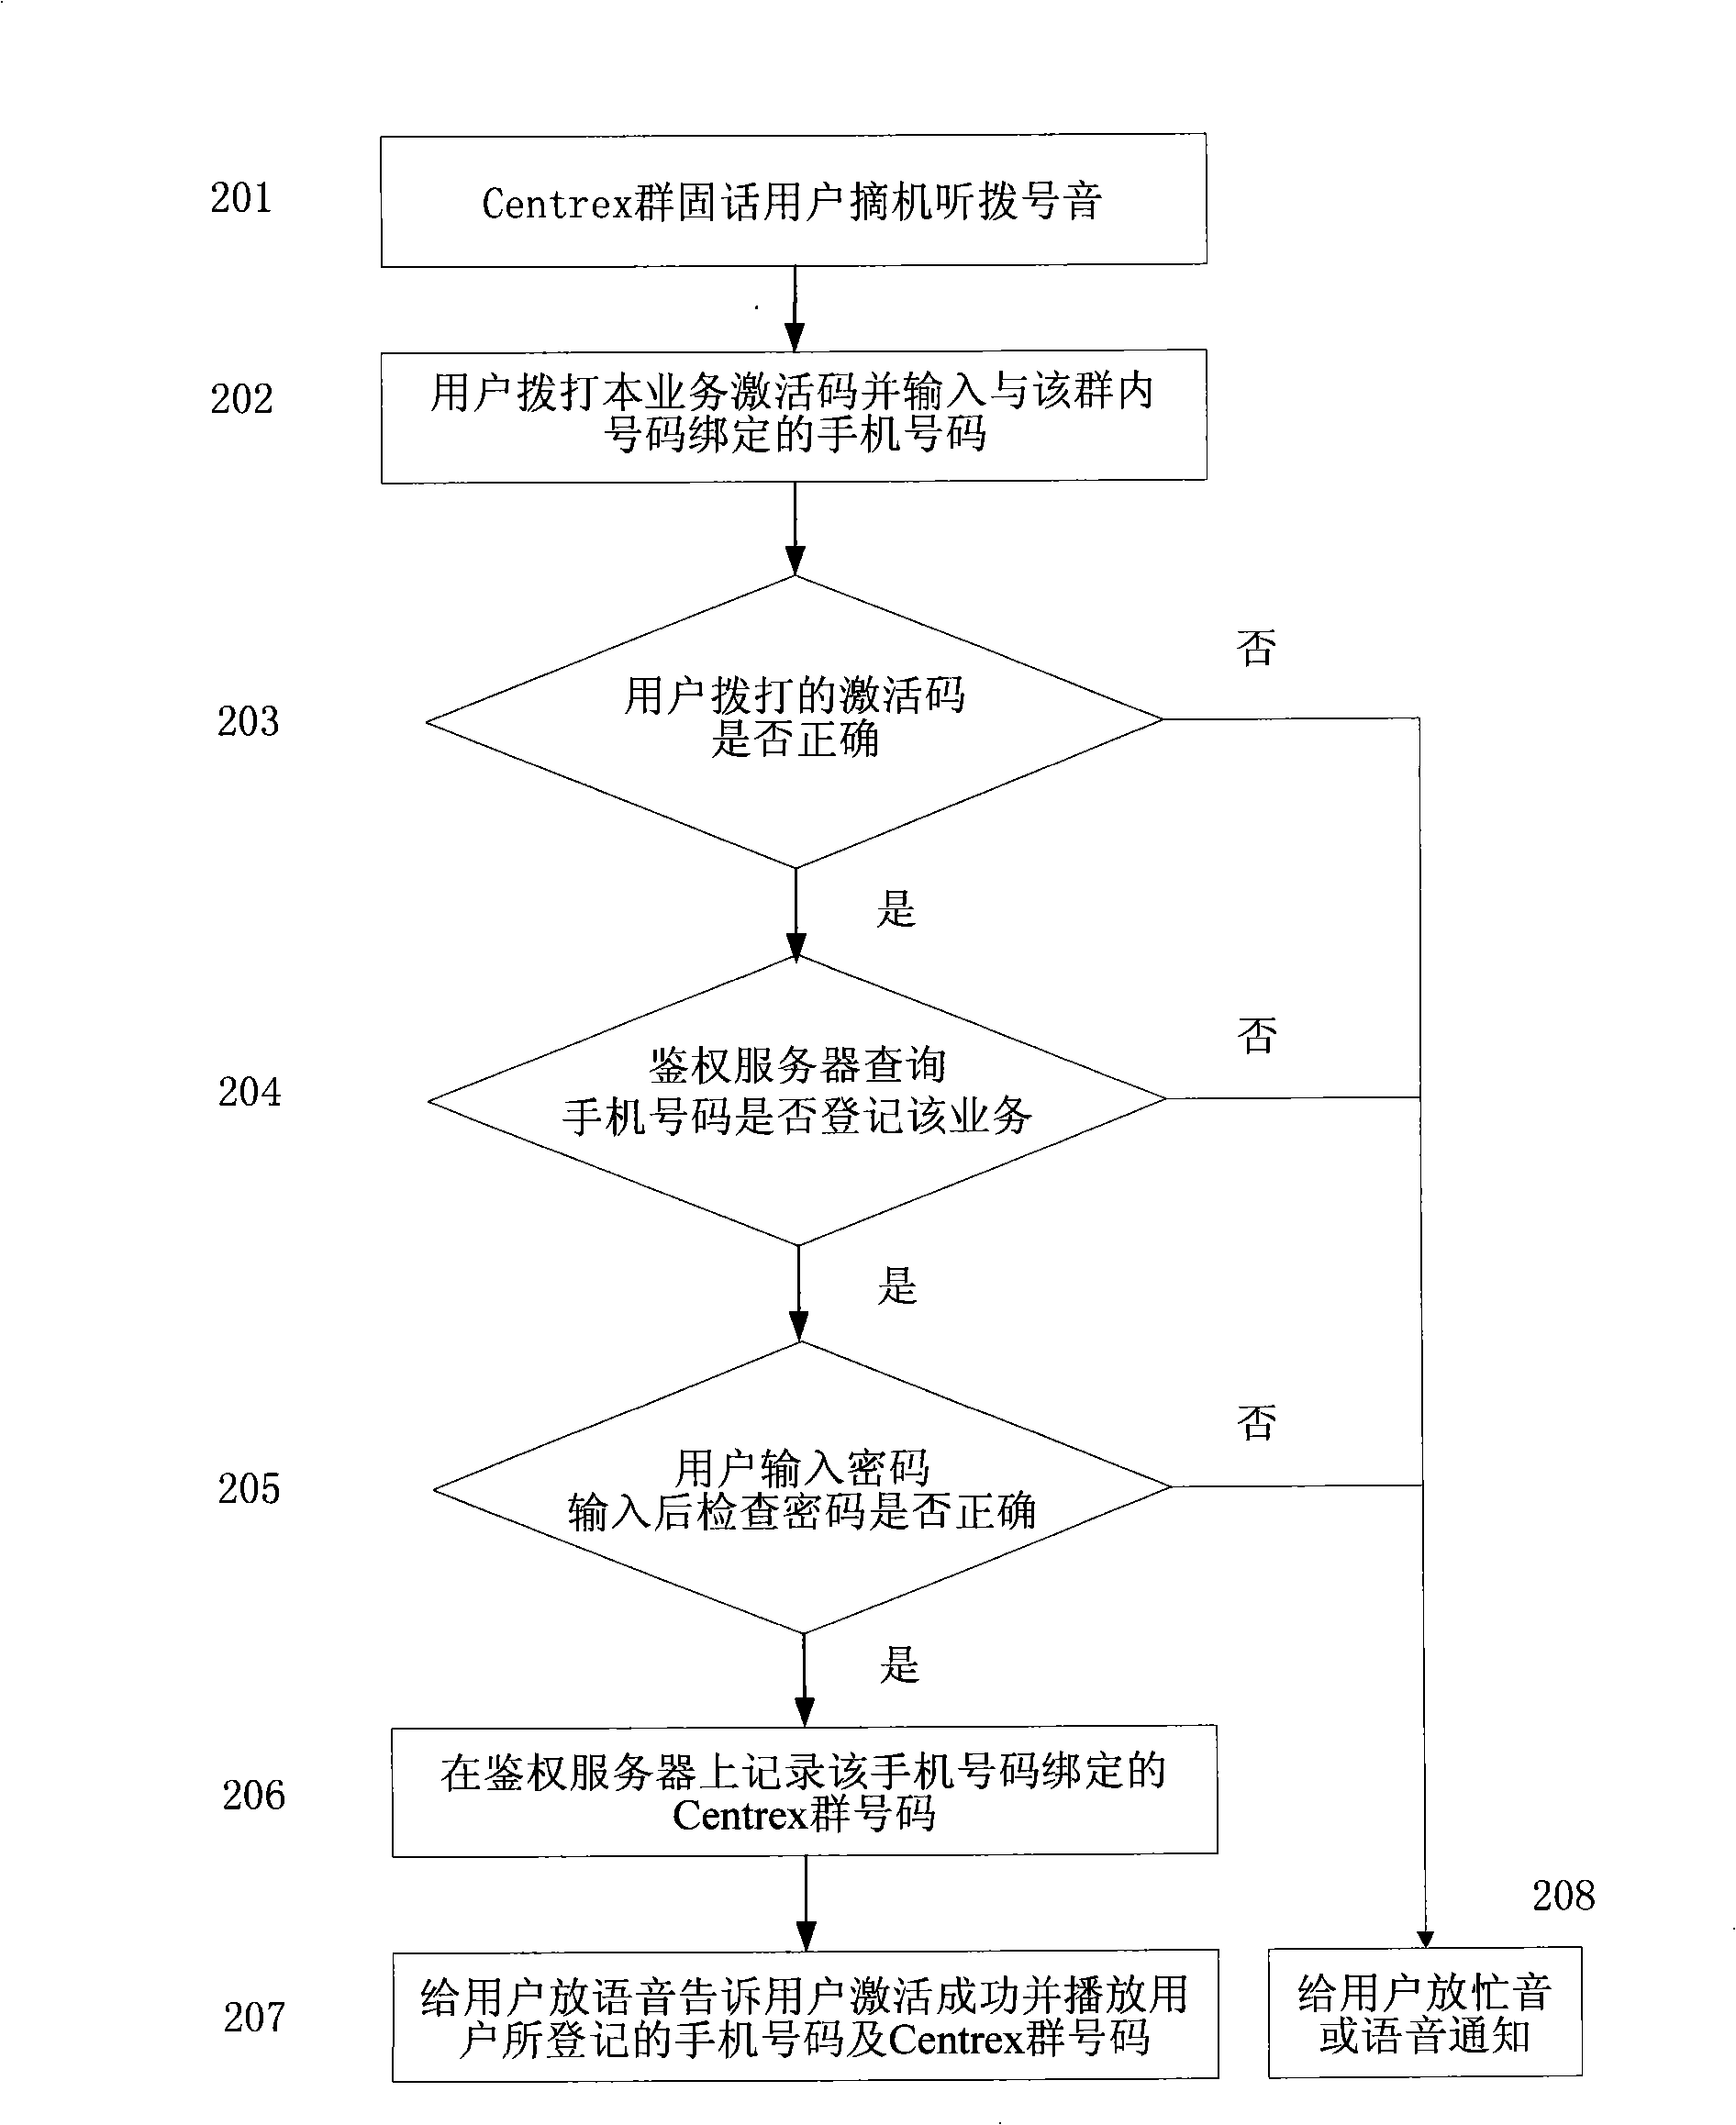 Method and system for translating the call of numbers in a group to a mobile number into calls in a group